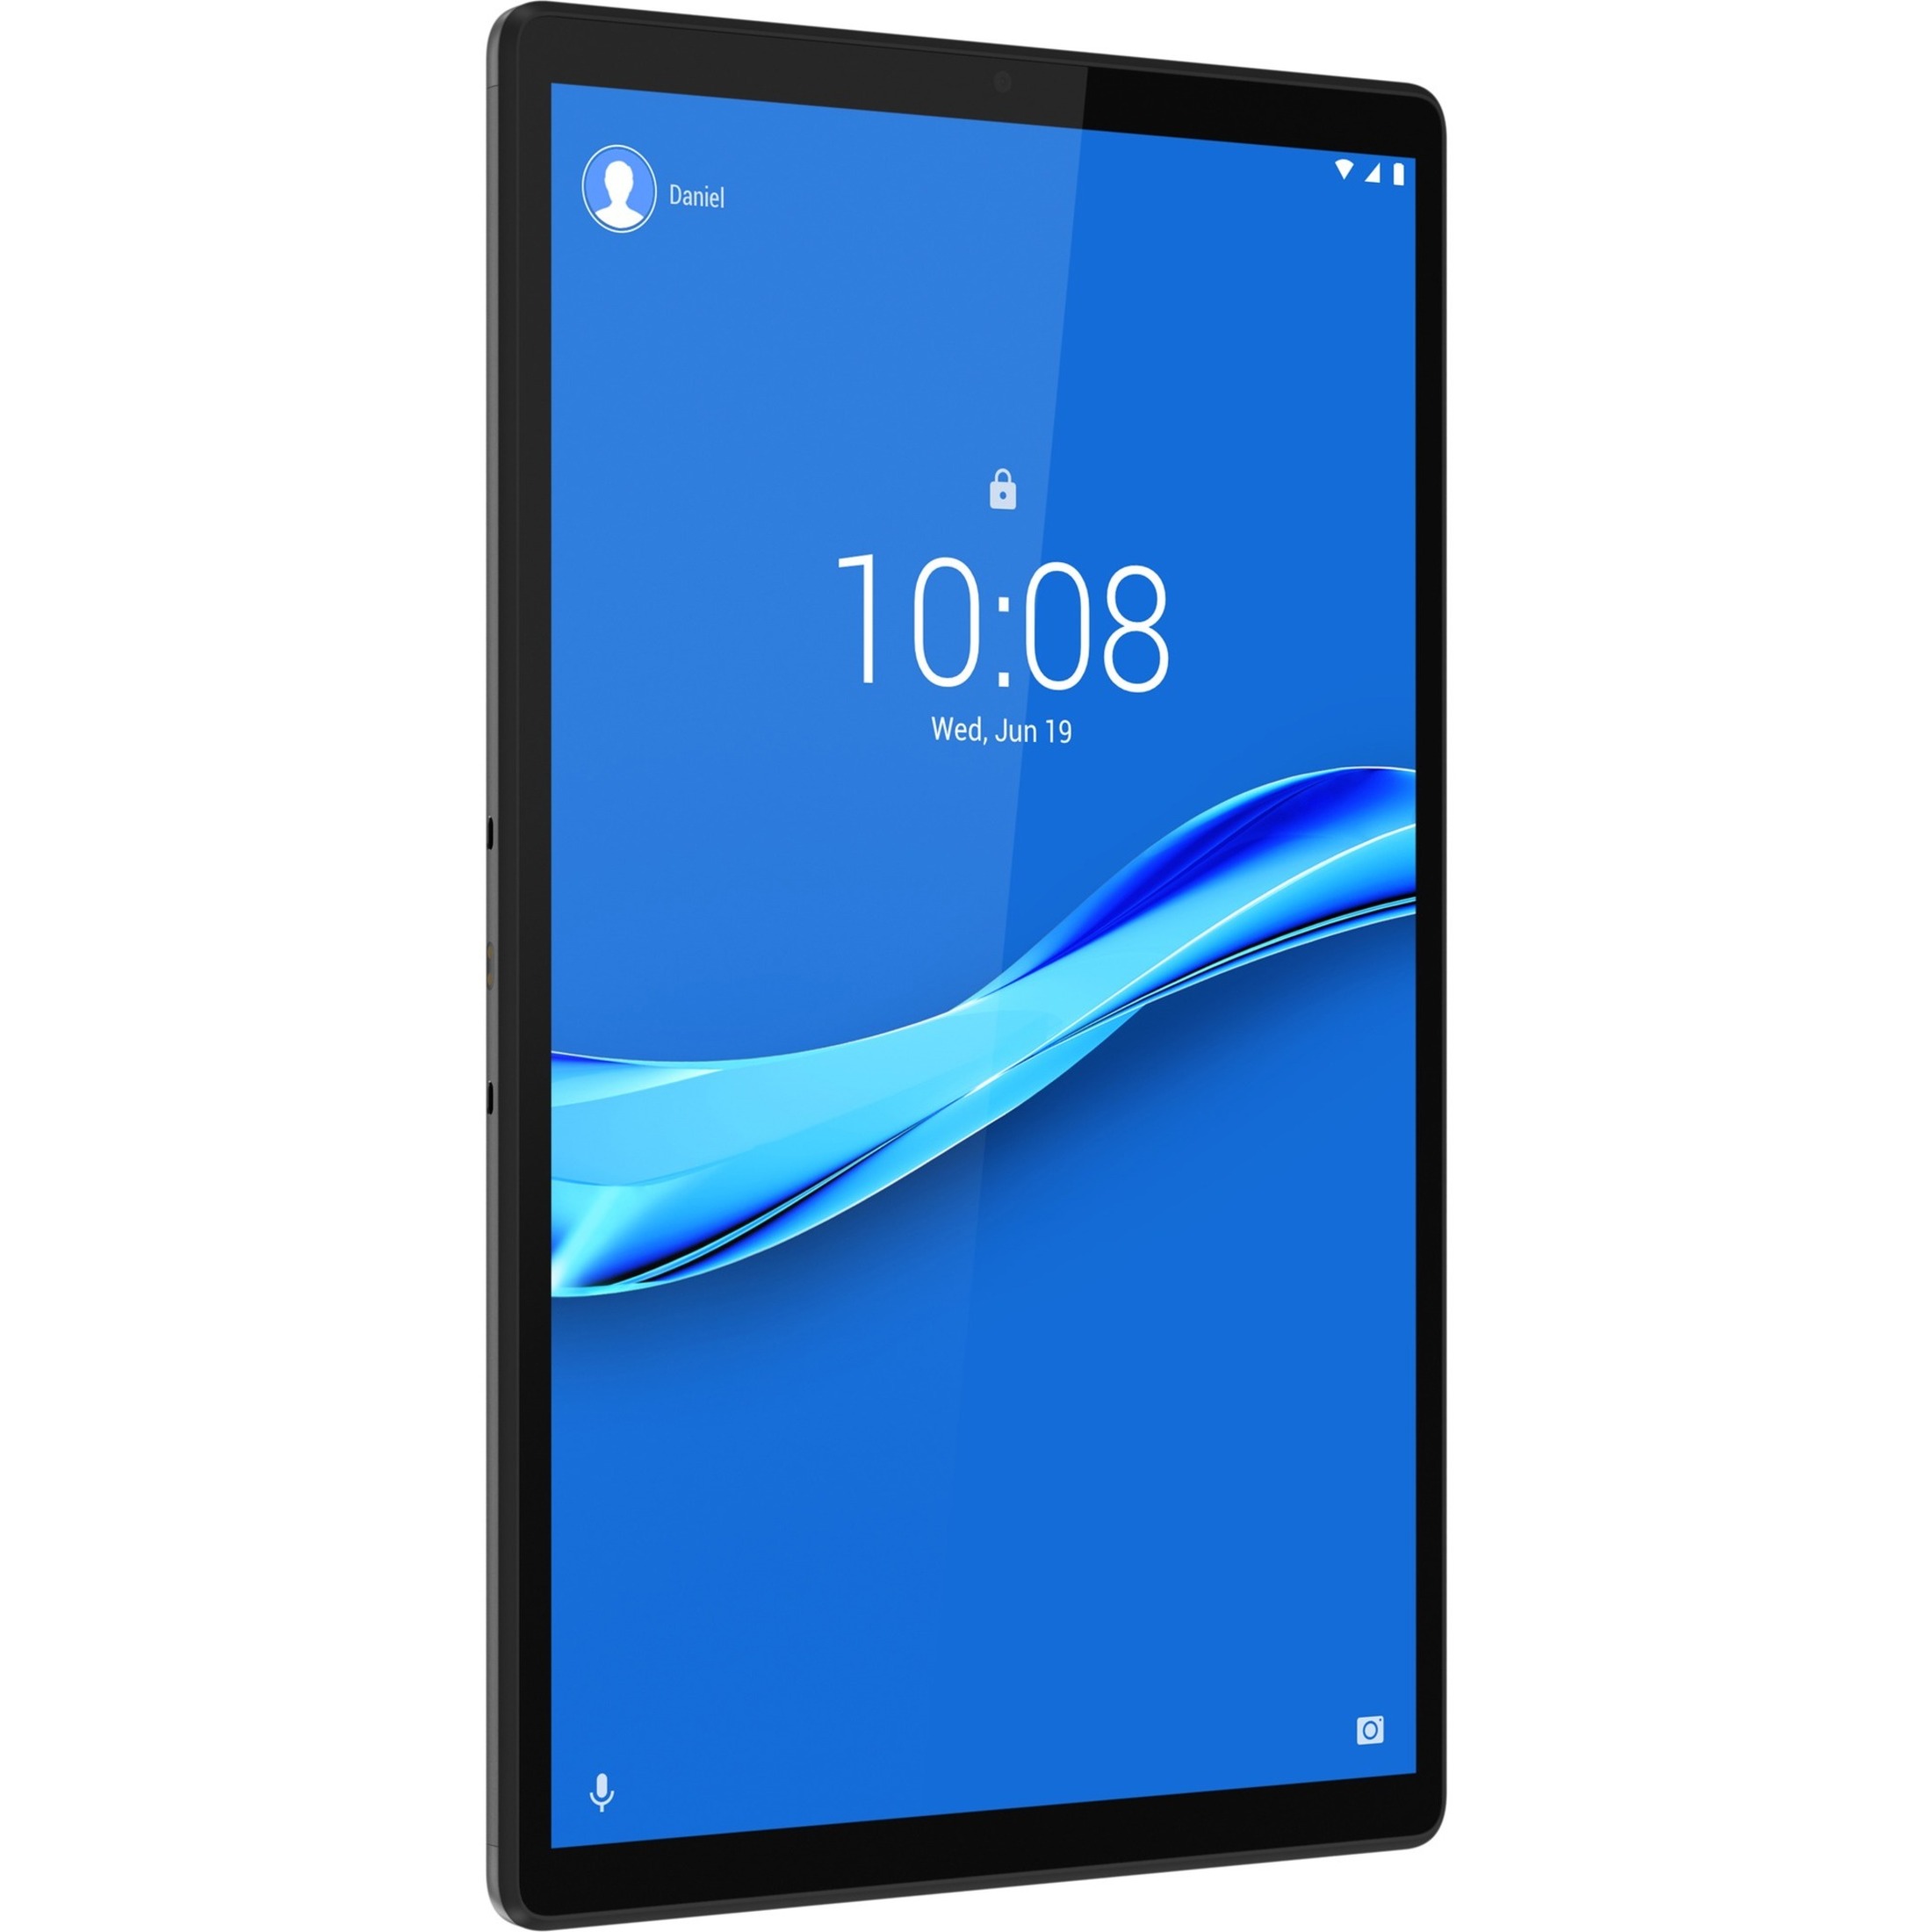 Lenovo Tab M10 10.3" Tablet - MediaTek Helio P22T - 4GB - 64GB FHD Plus with the Smart Charging Station - Android 9.0 (Pie) - image 15 of 33